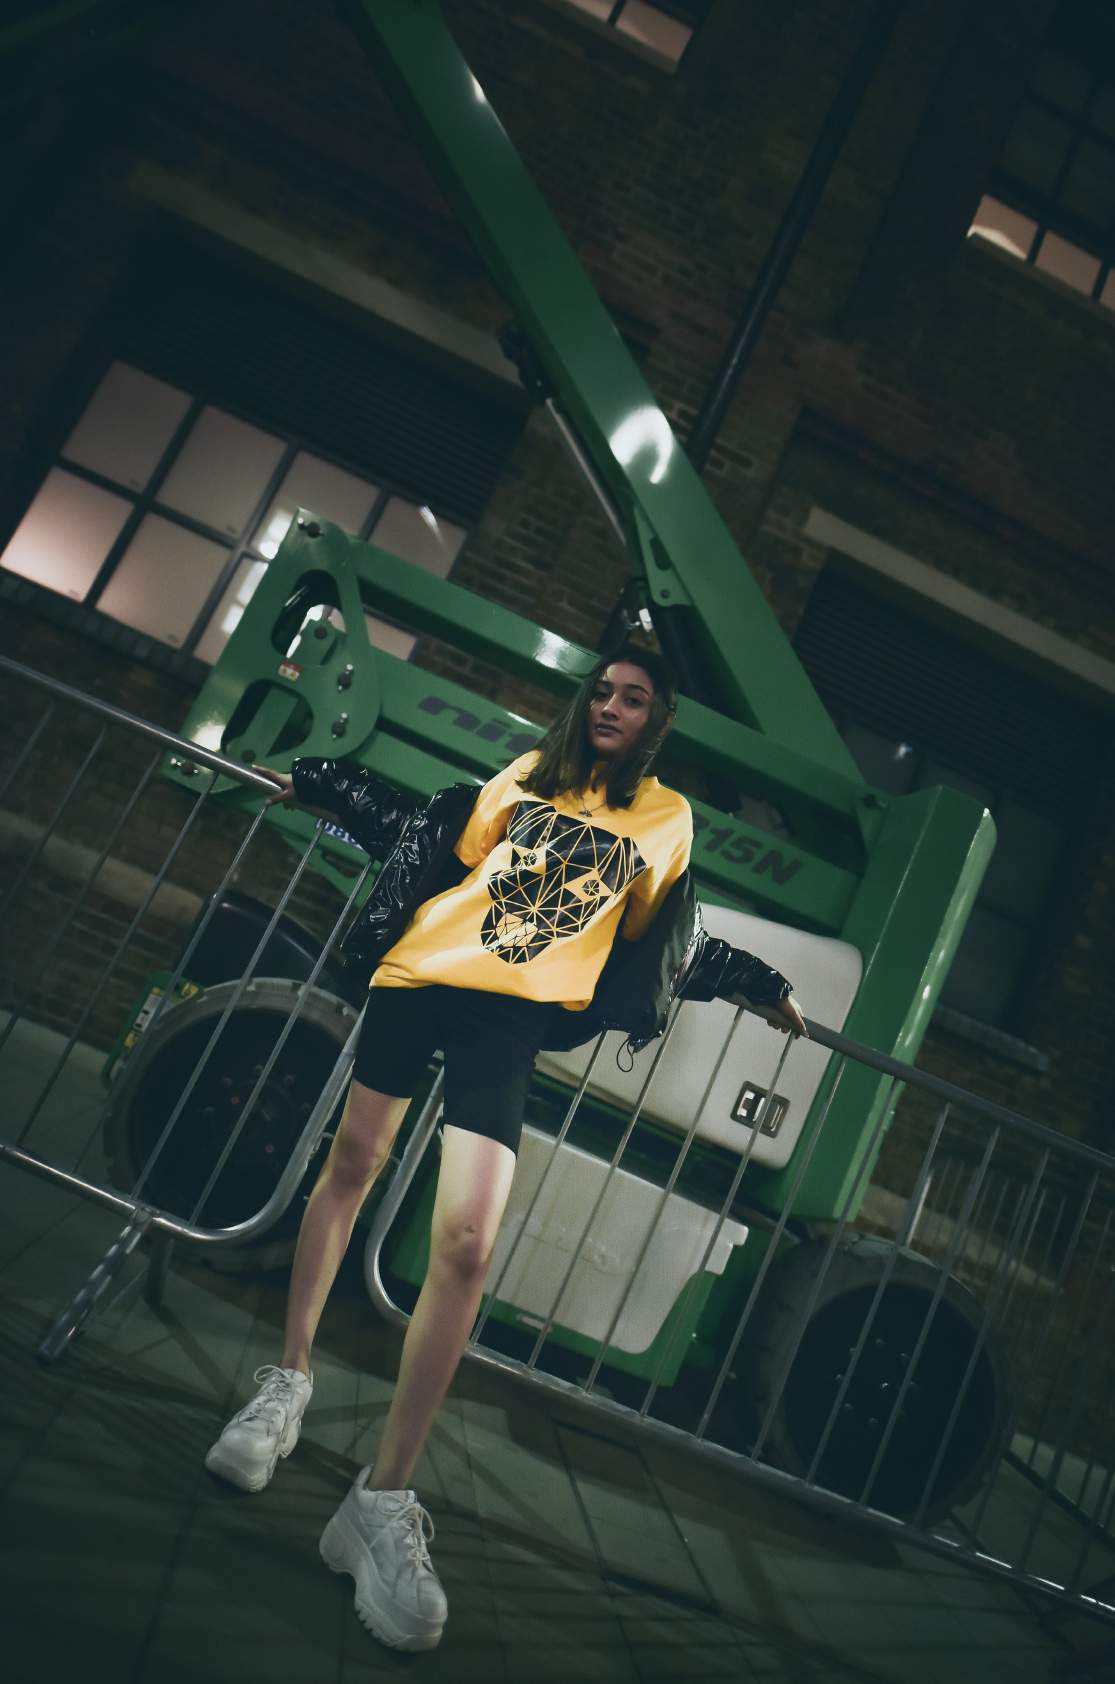 A girl wearing yellow round neck short sleeve regular fit T-shirt with dog printed on it is paired with black shorts and shoes is standing holding a grill.